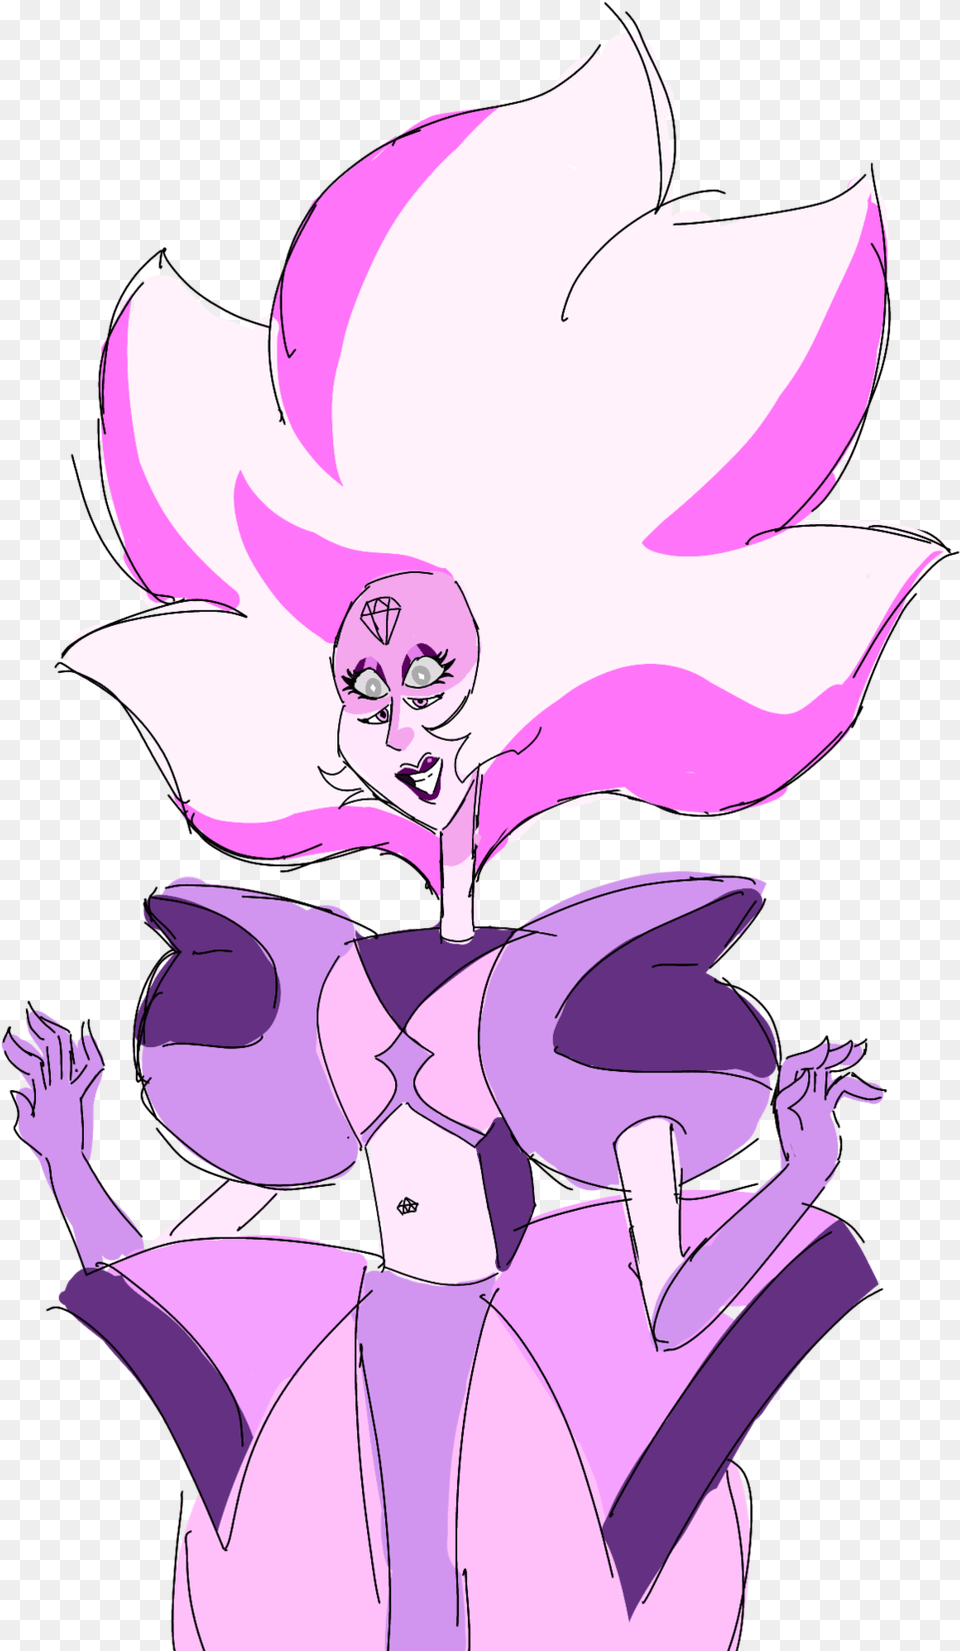 An Sketchy Sketch Of Bubblegum Diamond Inspired By Steven Universe Fusions Purple Diamond, Book, Publication, Comics, Plant Png Image